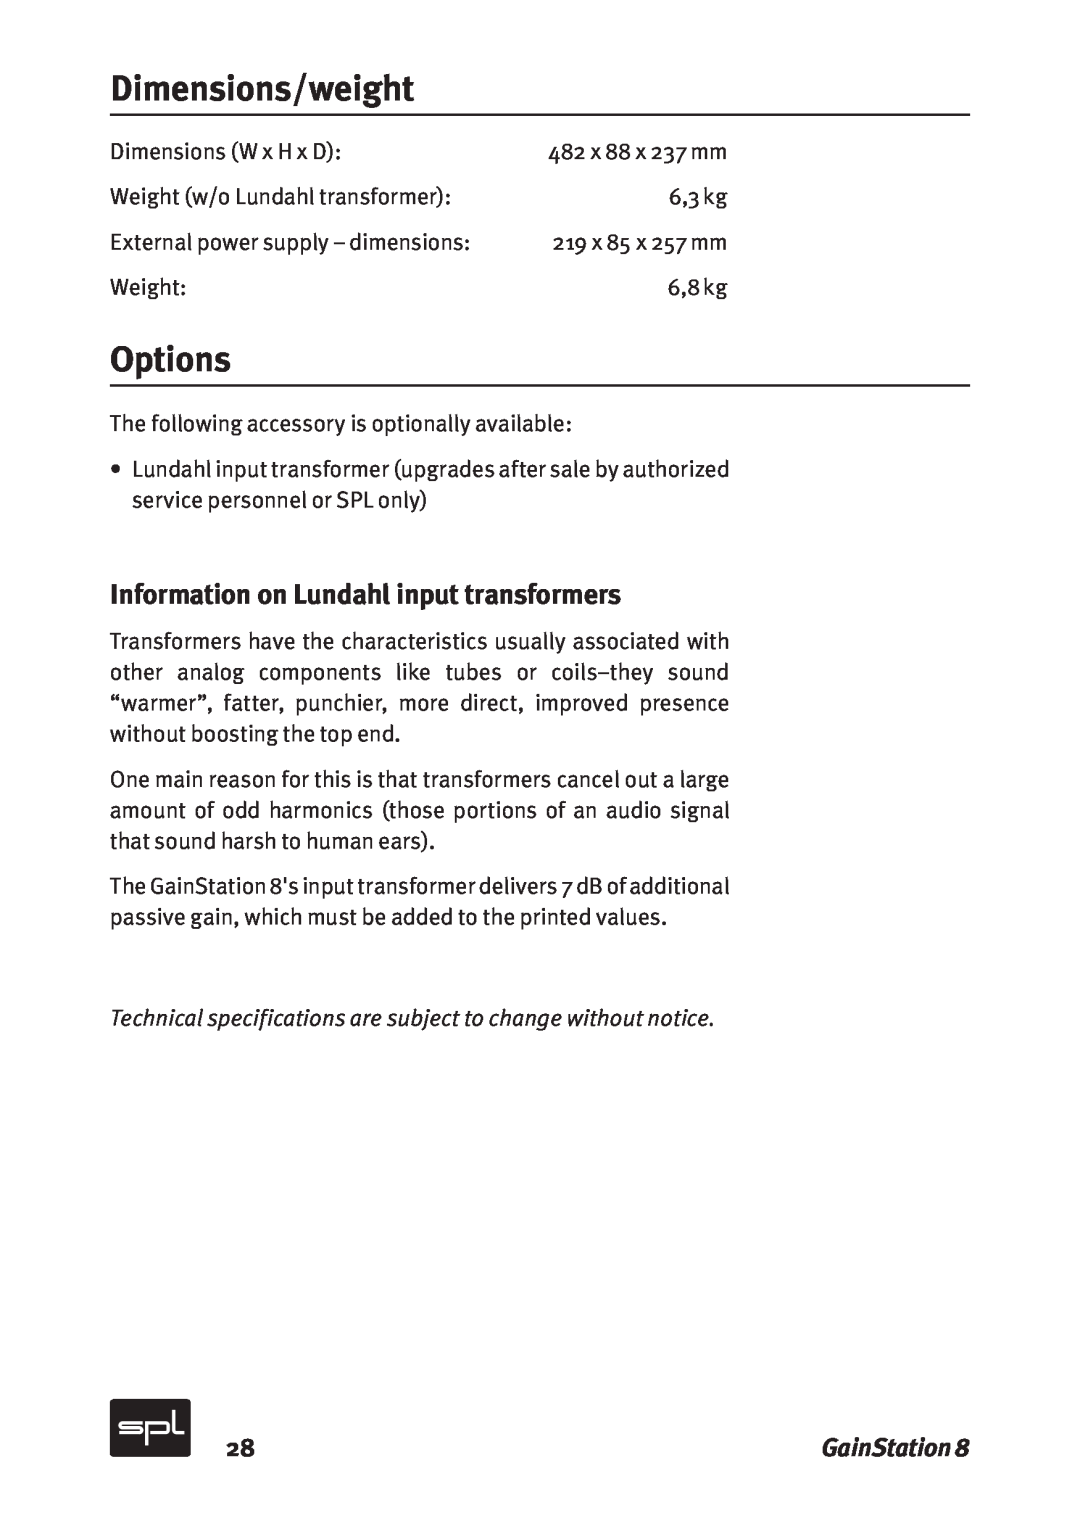 Sound Performance Lab 2383 manual Dimensions/weight, Options, Information on Lundahl input transformers, GainStation 